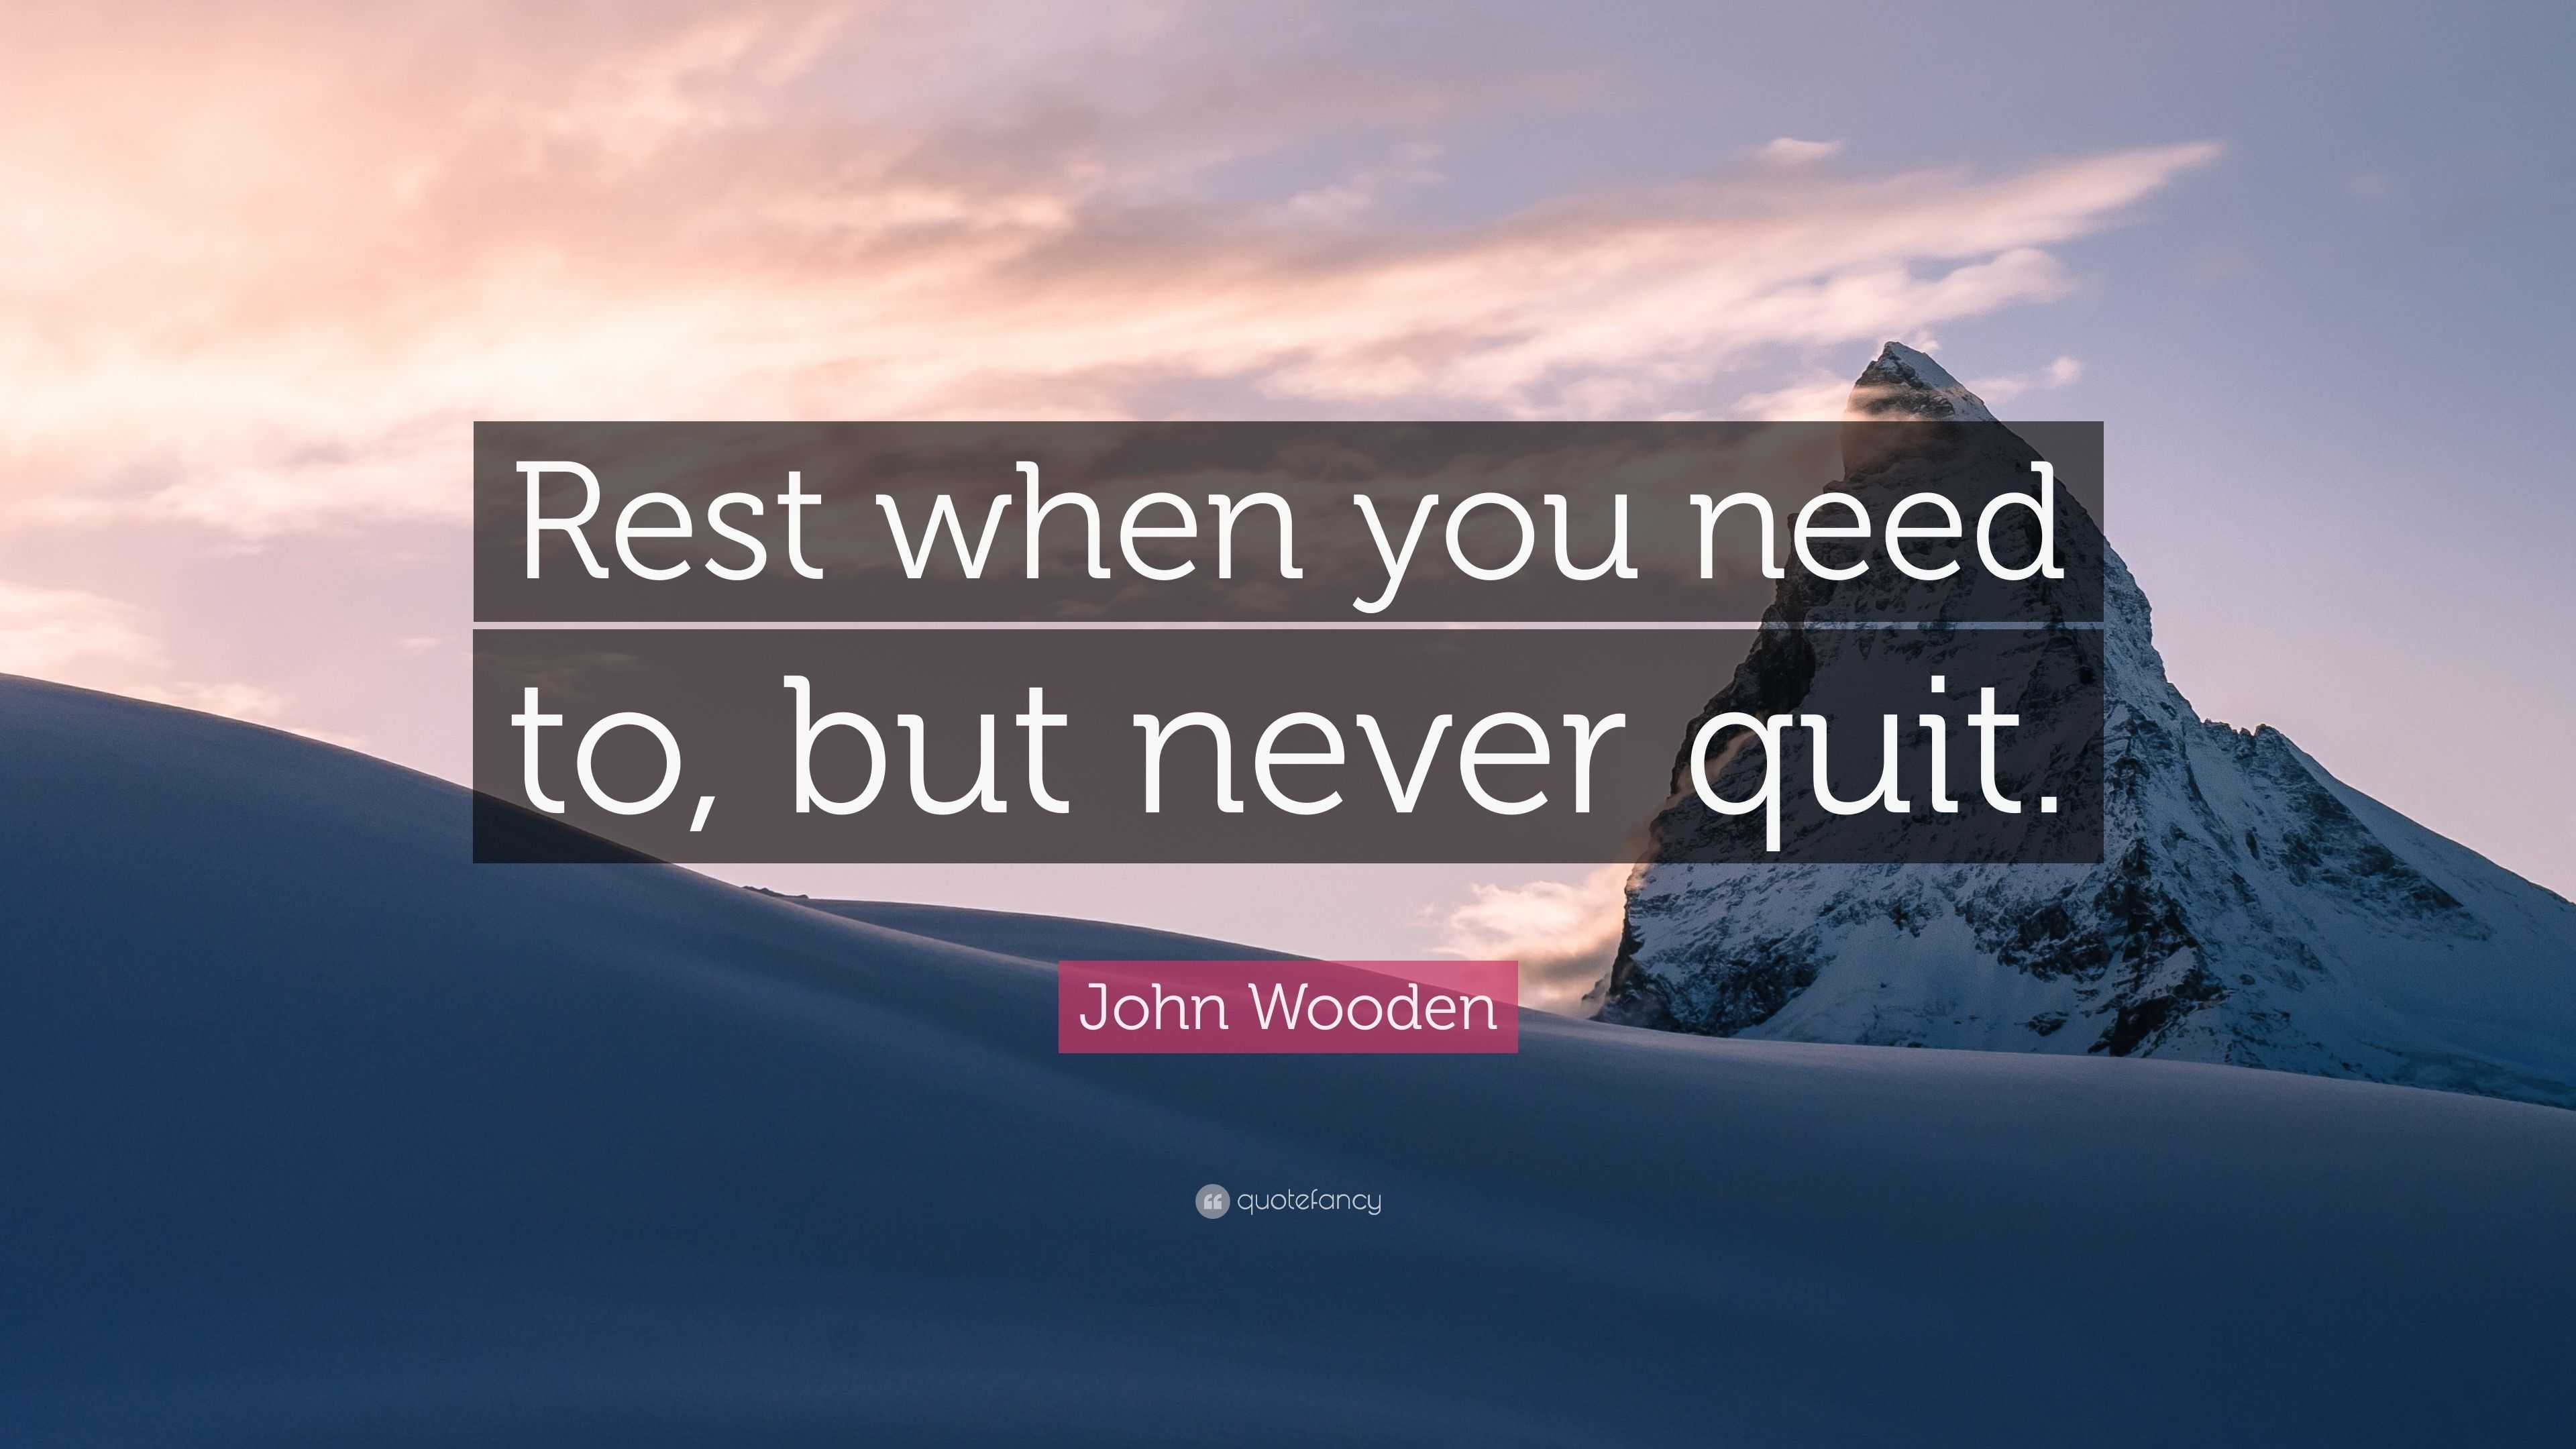 John Wooden Quote: “Rest when you need to, but never quit.”